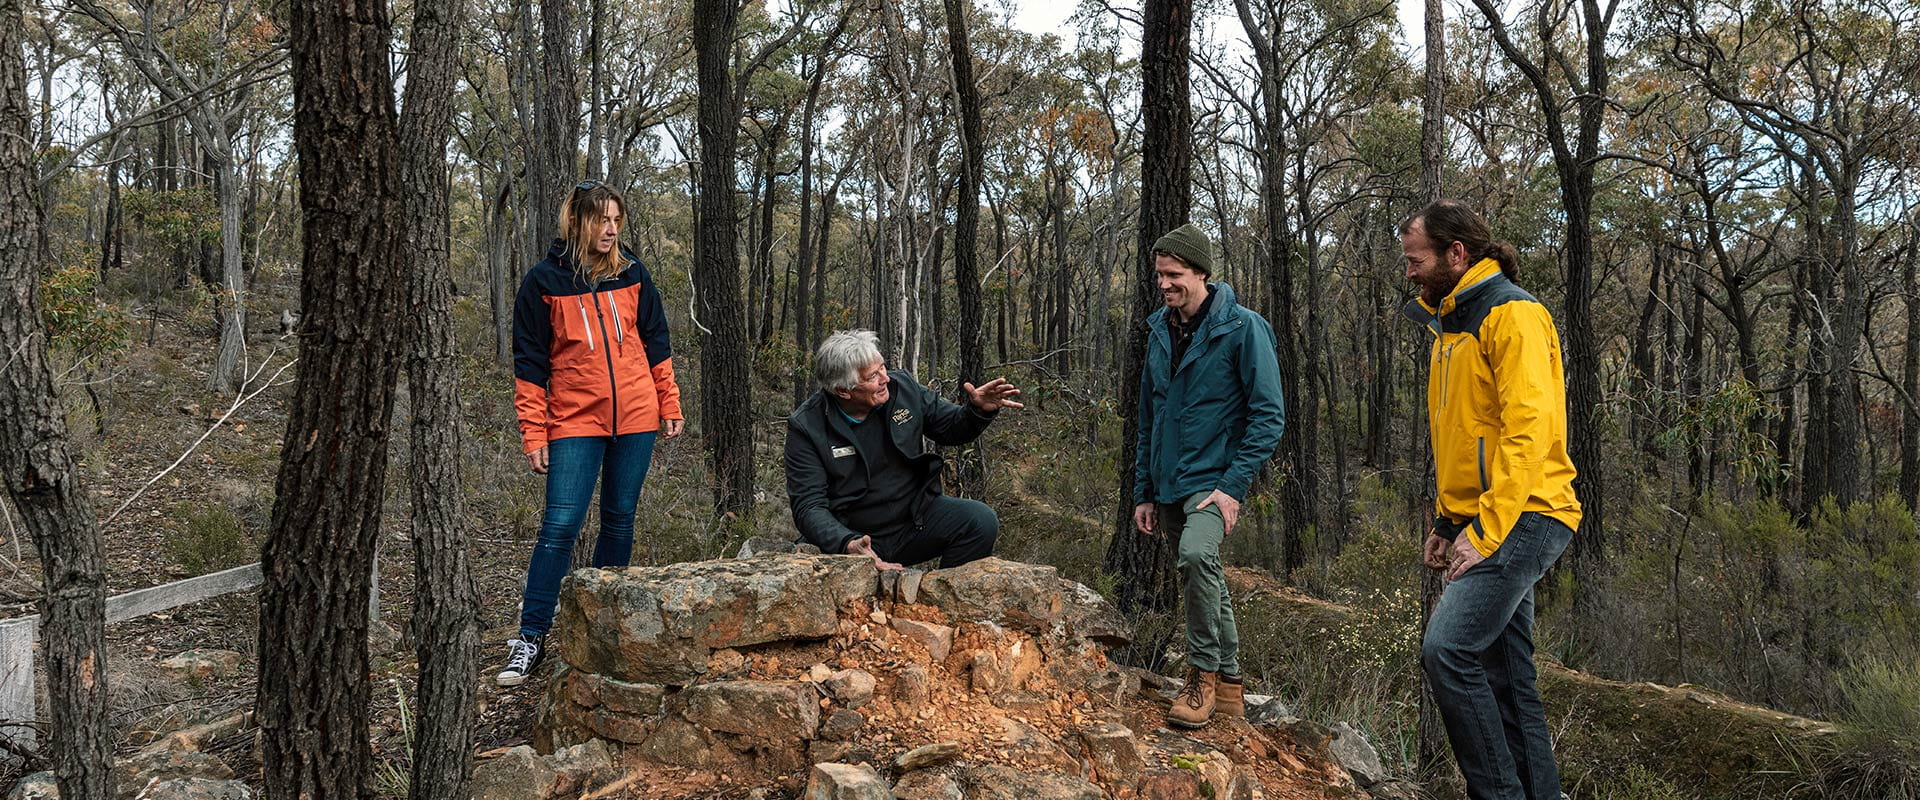 A group of people discuss the significance of a small cluster of stonework amongst a rugged bushland